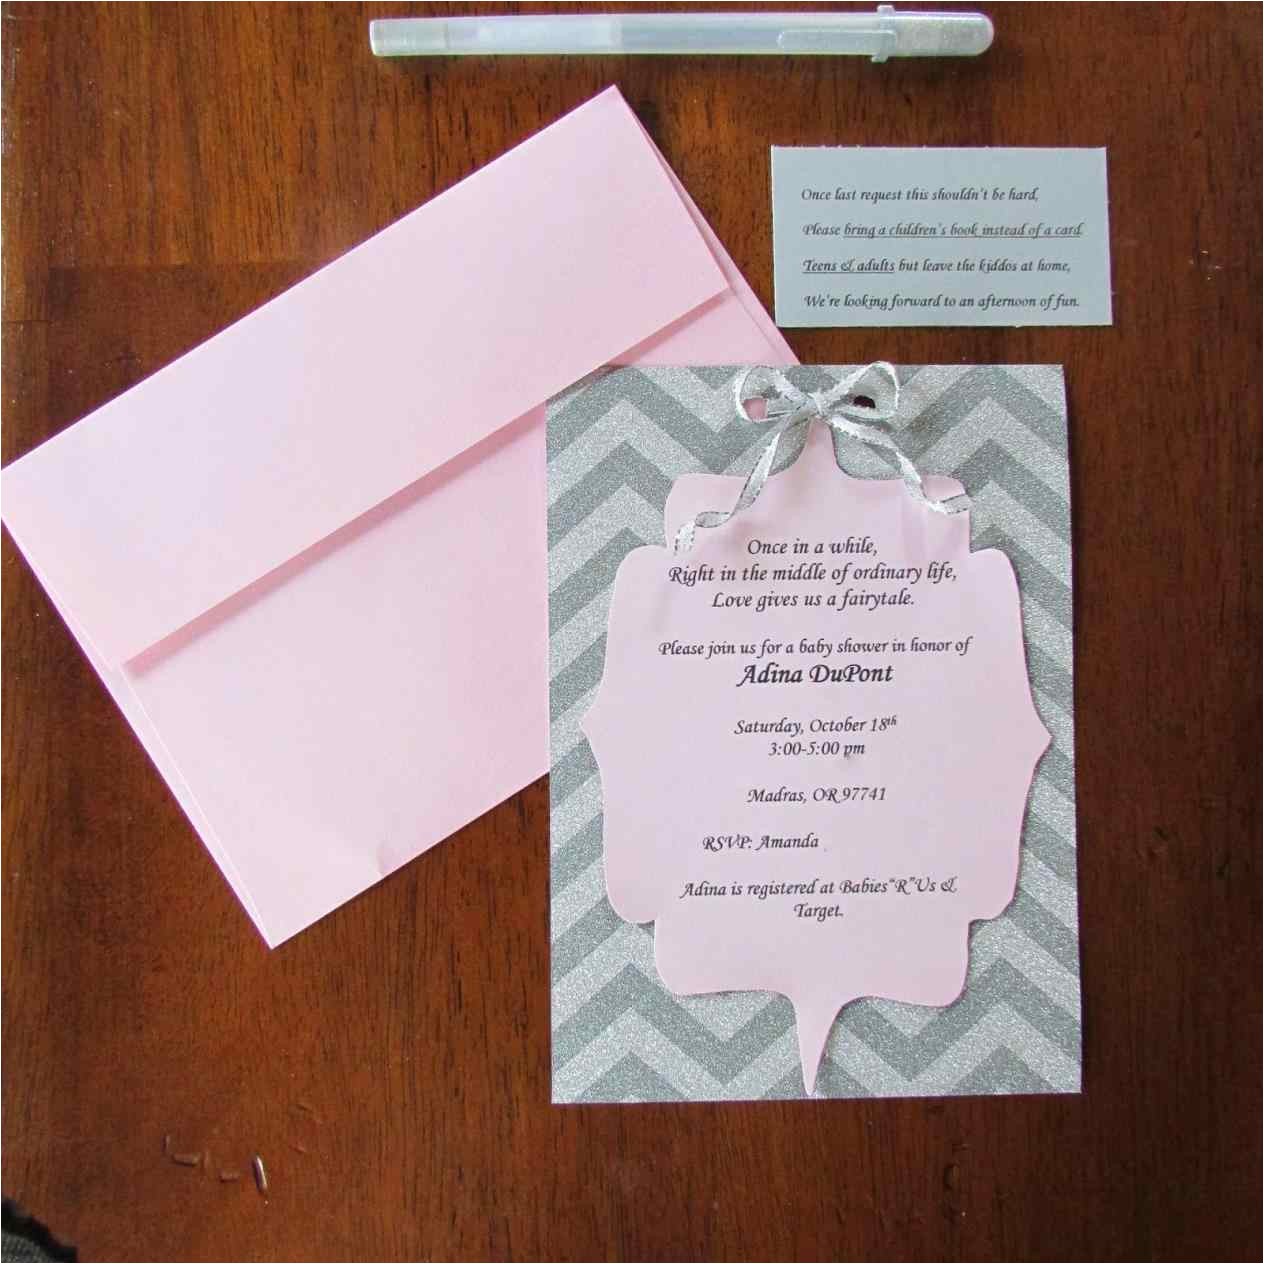 Best Place to Buy Baby Shower Invitations Invites Diy Best Place to Buy Baby Shower Invitations Show